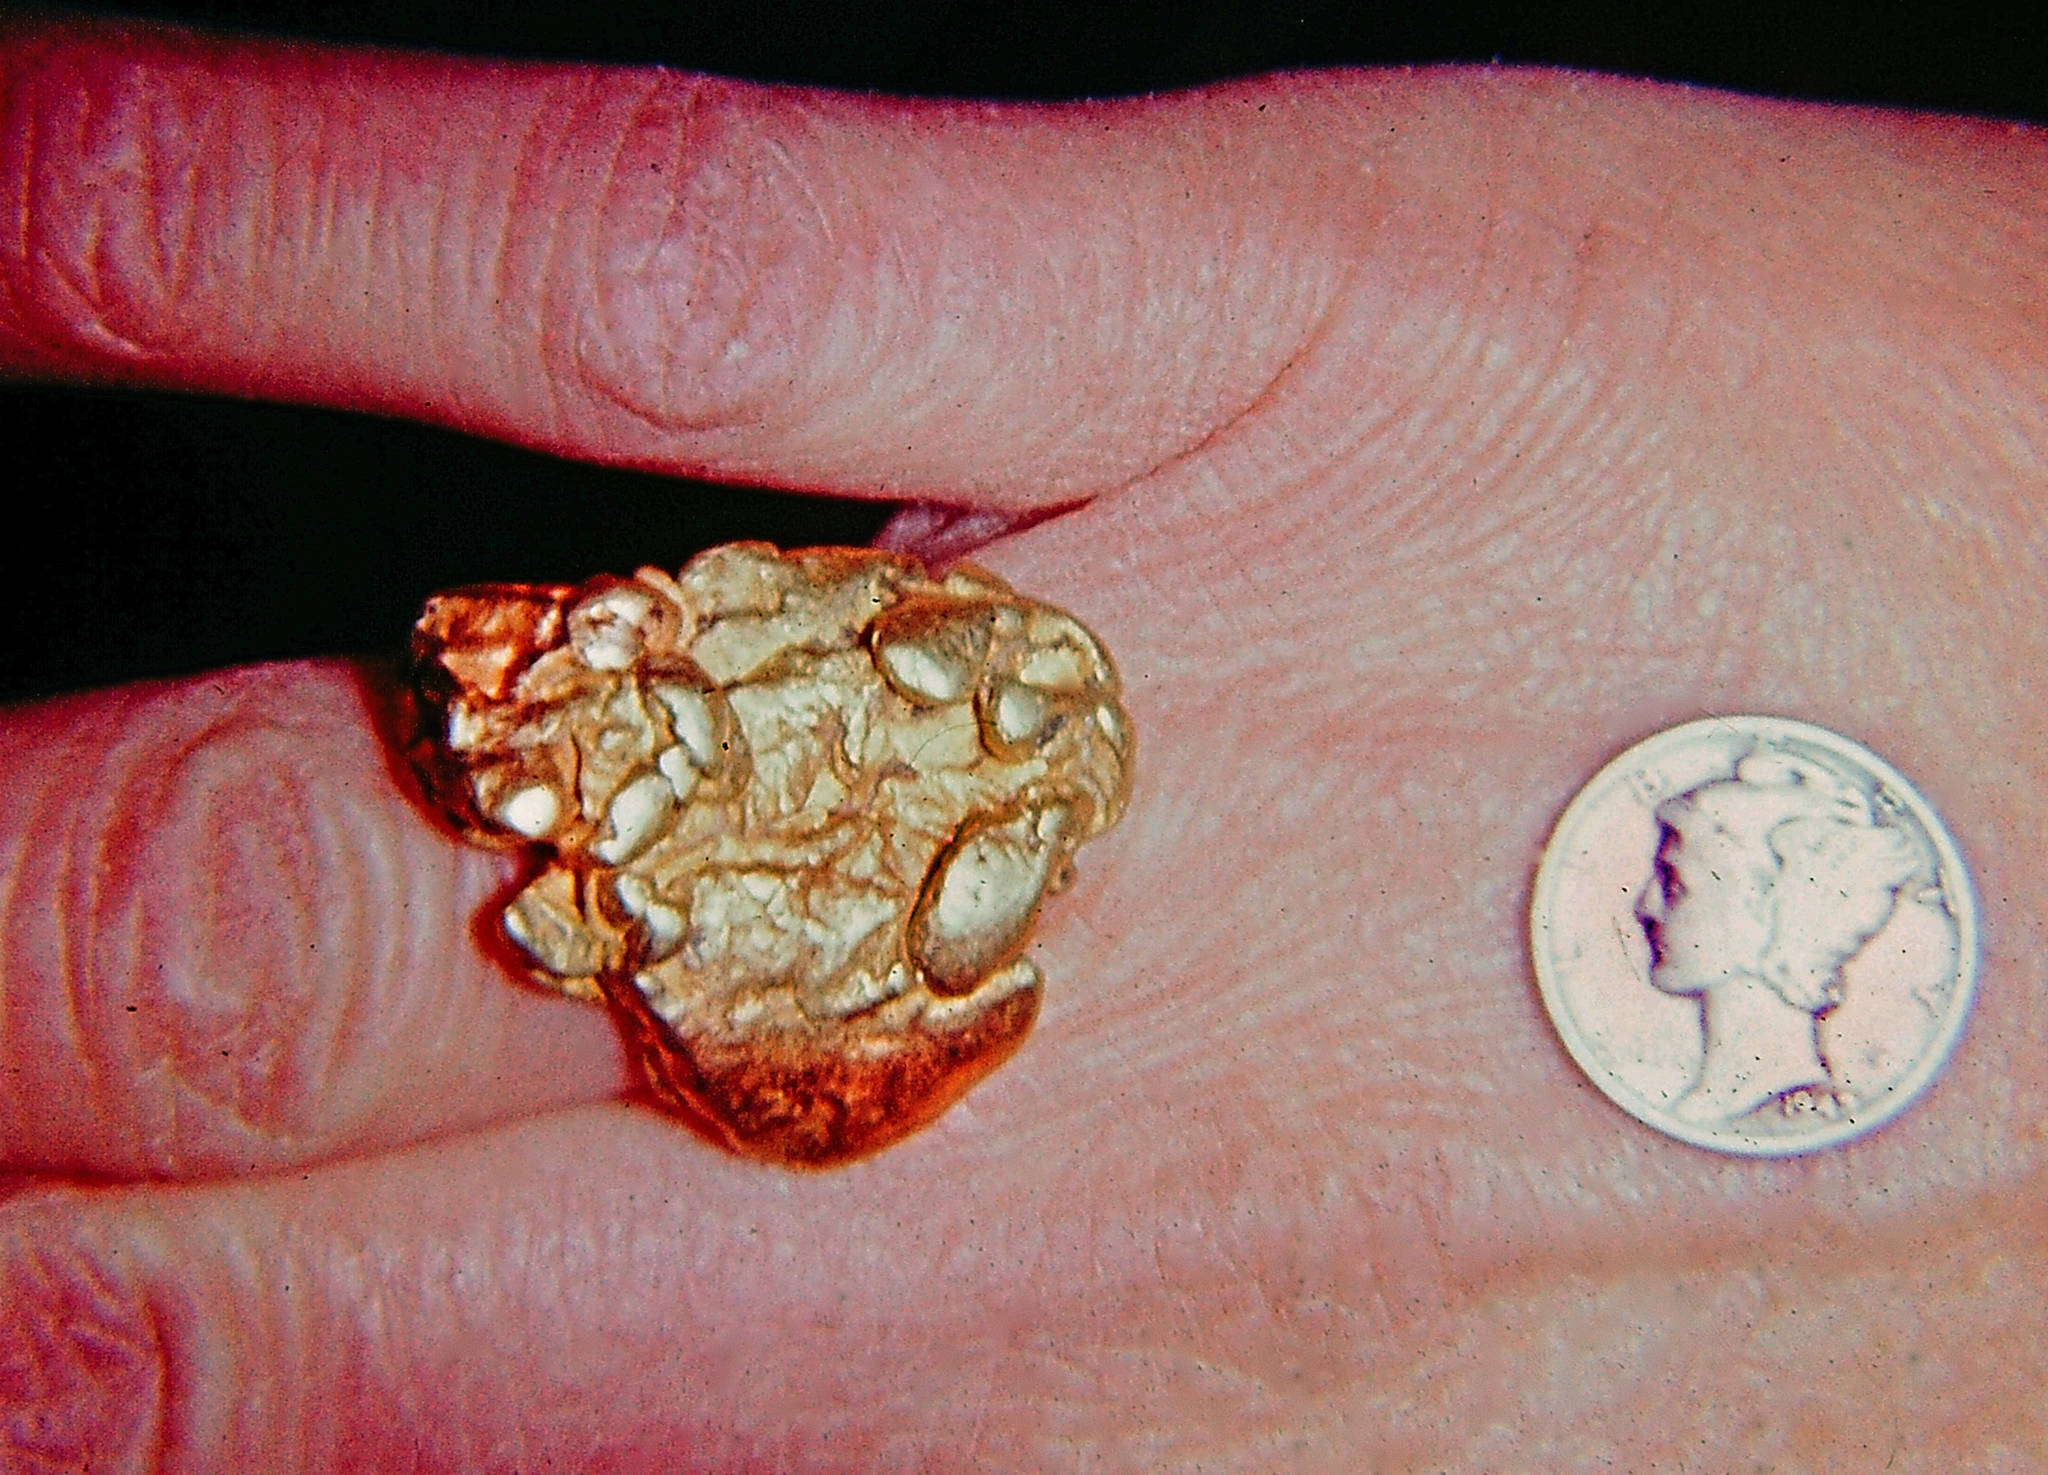 A gold nugget and a Mercury-head dime, both owned by Big Jim and lying atop his hand, circa early 1960s. (Photo from the Fair Family Collection)